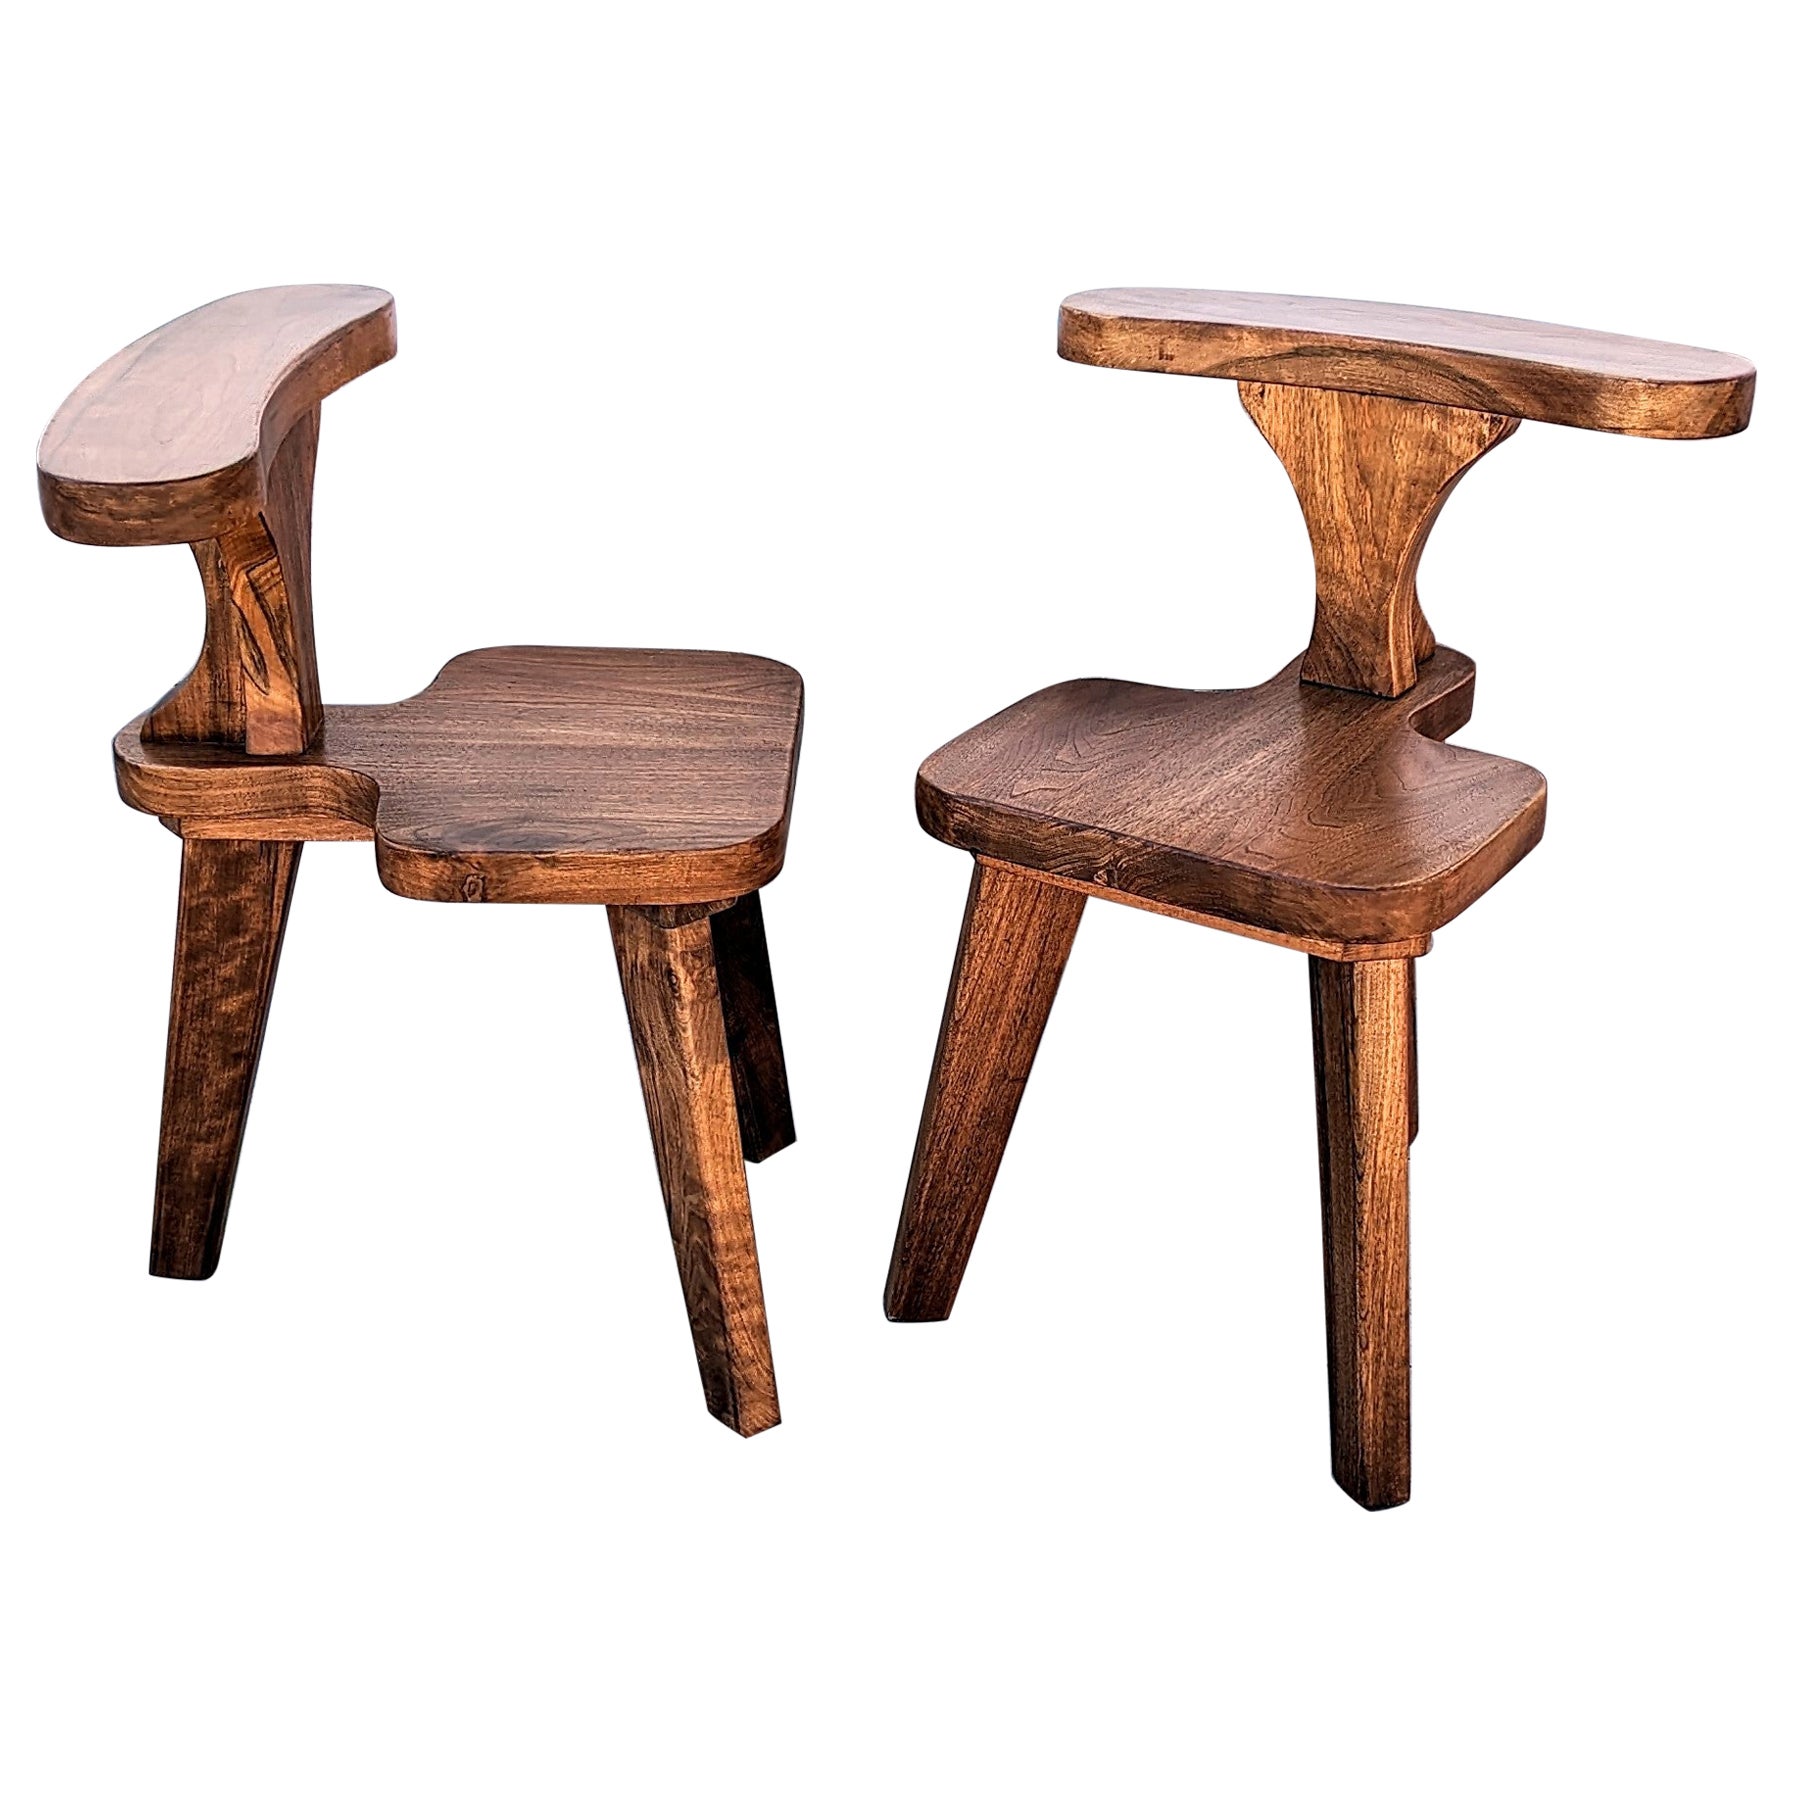 Brutalist Oak Smoking Chairs, 1960s For Sale